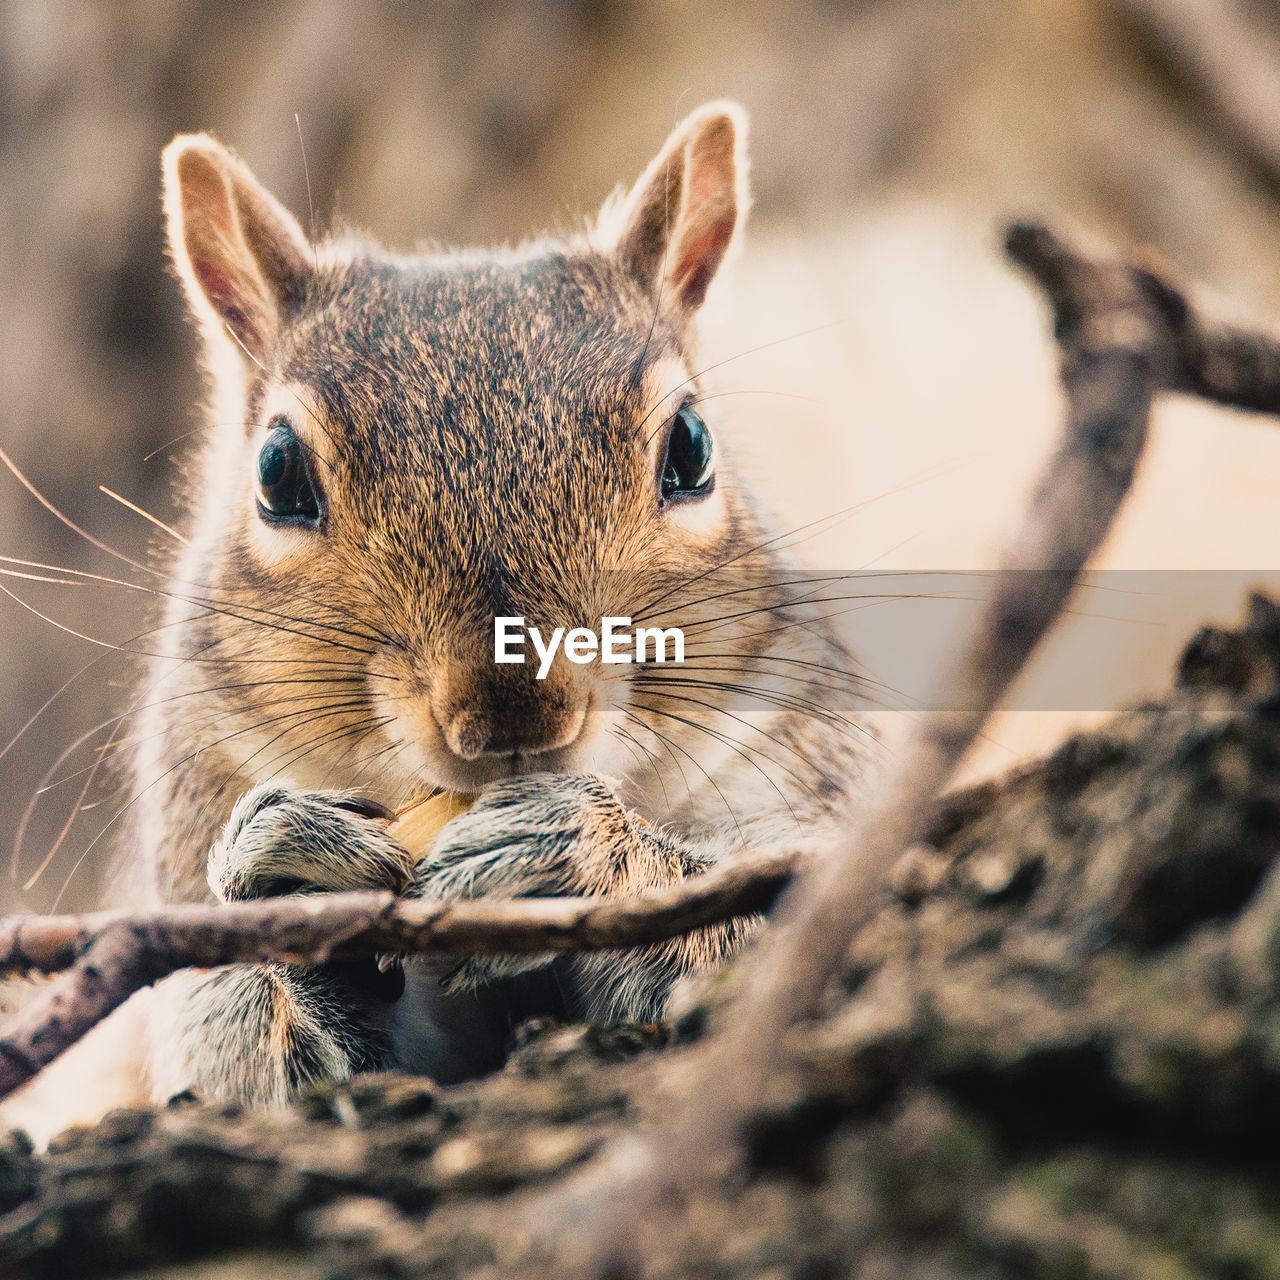 animal, animal themes, animal wildlife, whiskers, one animal, mammal, rodent, close-up, wildlife, squirrel, nature, portrait, chipmunk, no people, eating, looking at camera, cute, outdoors, animal body part, selective focus, day, food